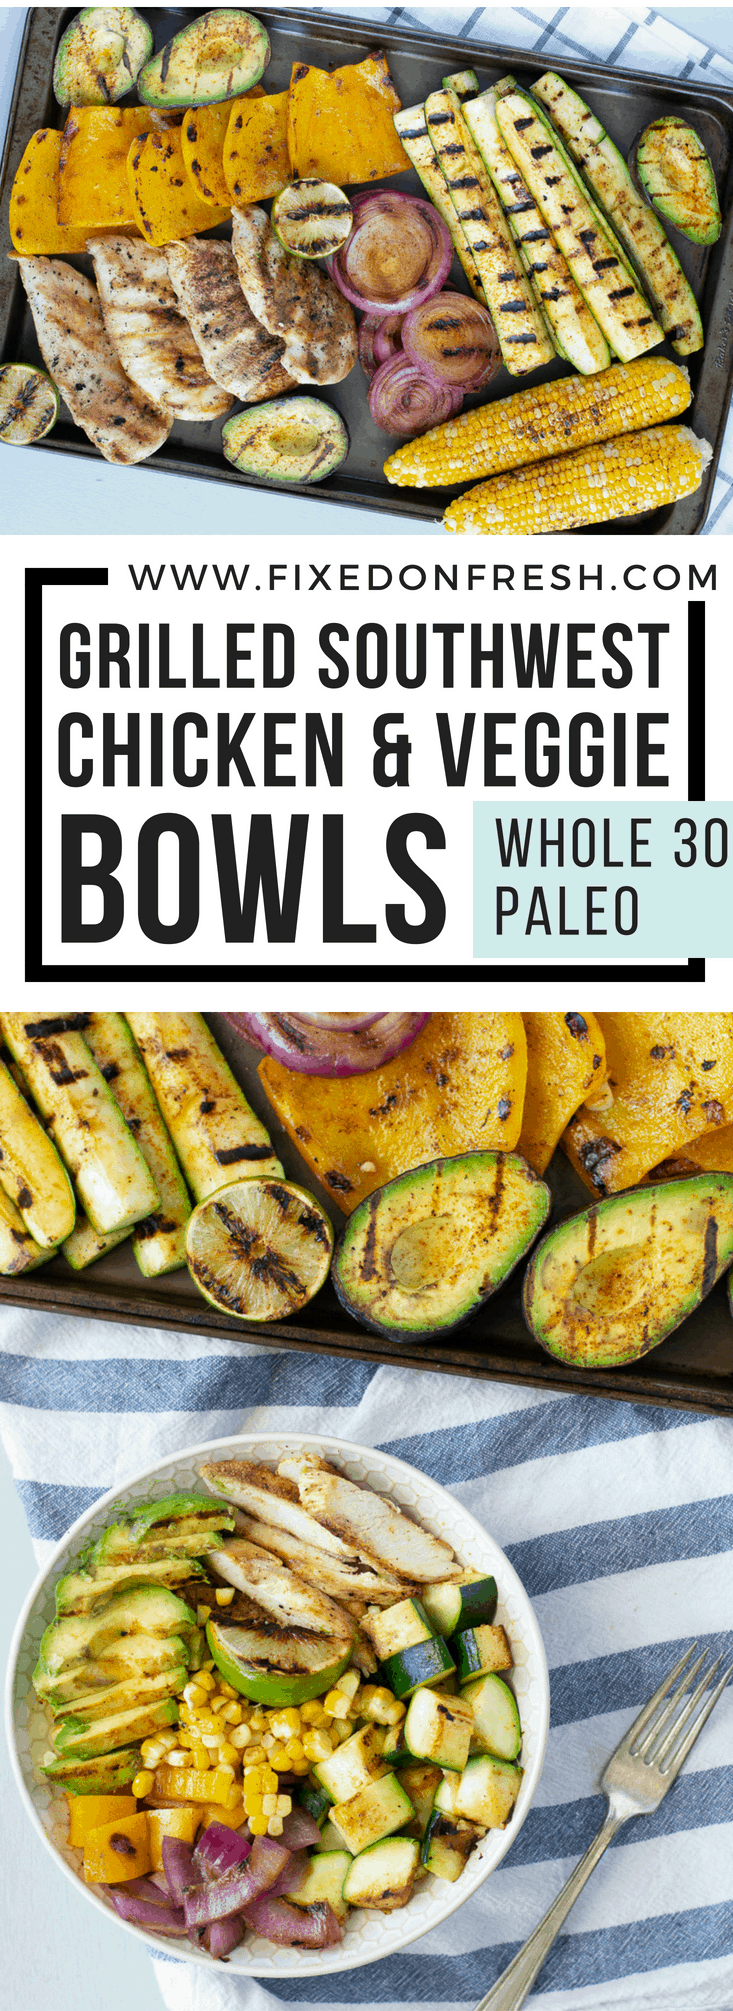 Grilled Chicken and Veggie Bowl {paleo - whole30} is easy to make and great for meal prep lunches or an easy one pan dinner. #grill #grilledveggies